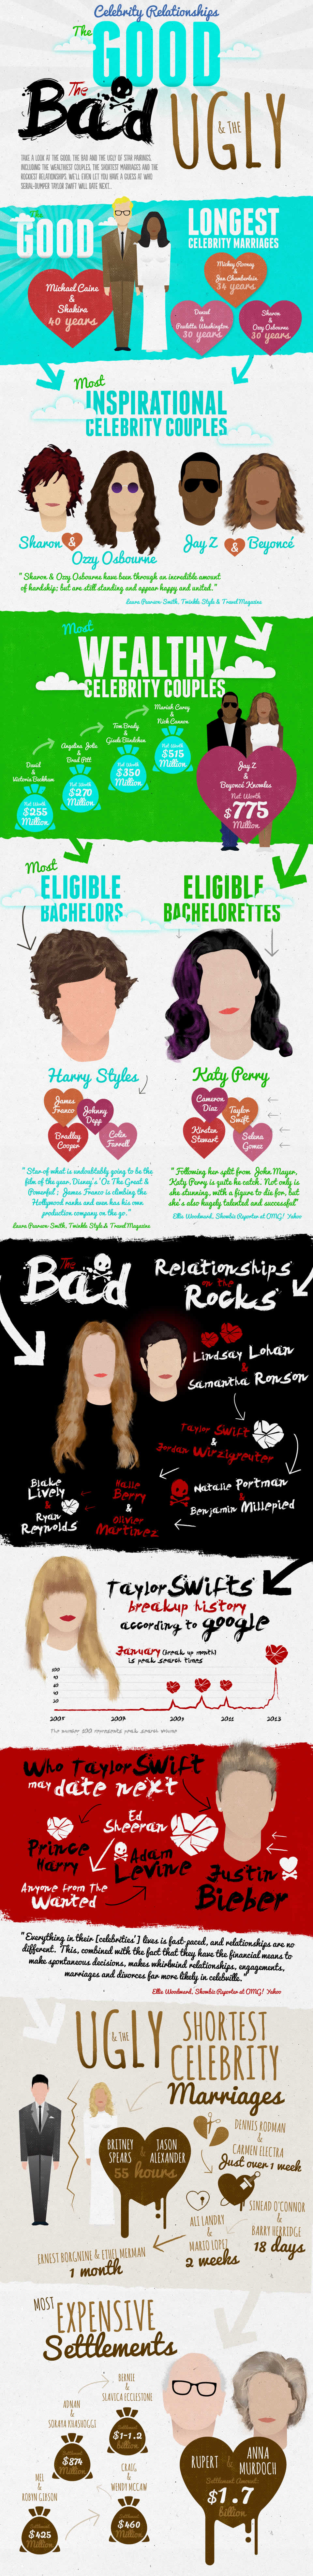 Celebrity Love Affairs-Infographic